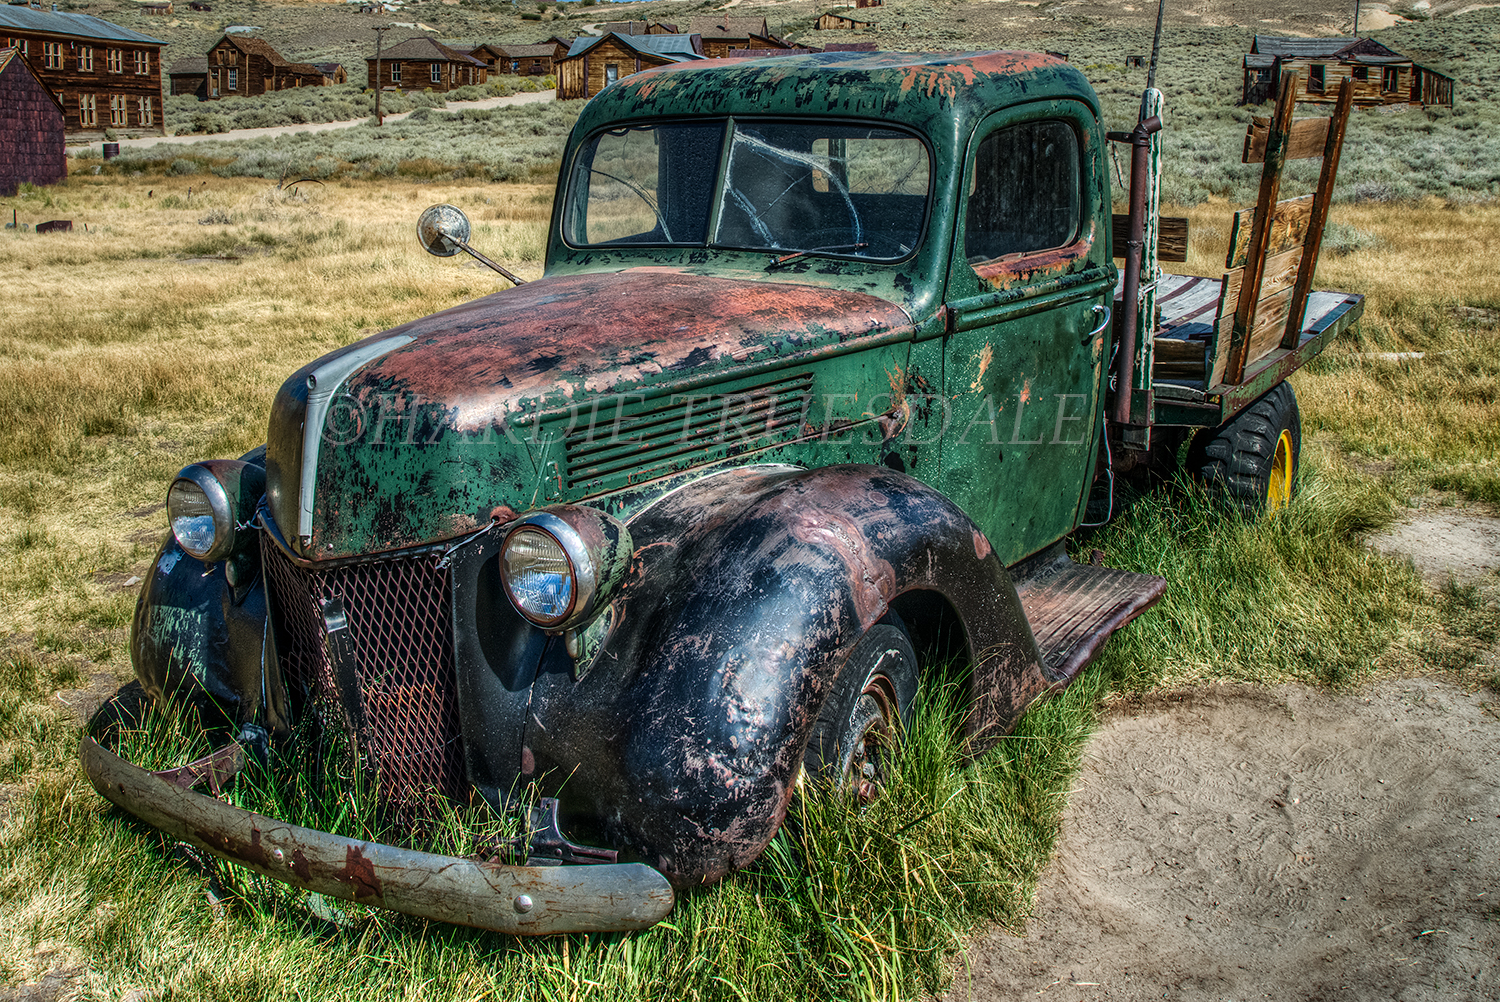 CA#178 "Abandoned Truck, Bodie"